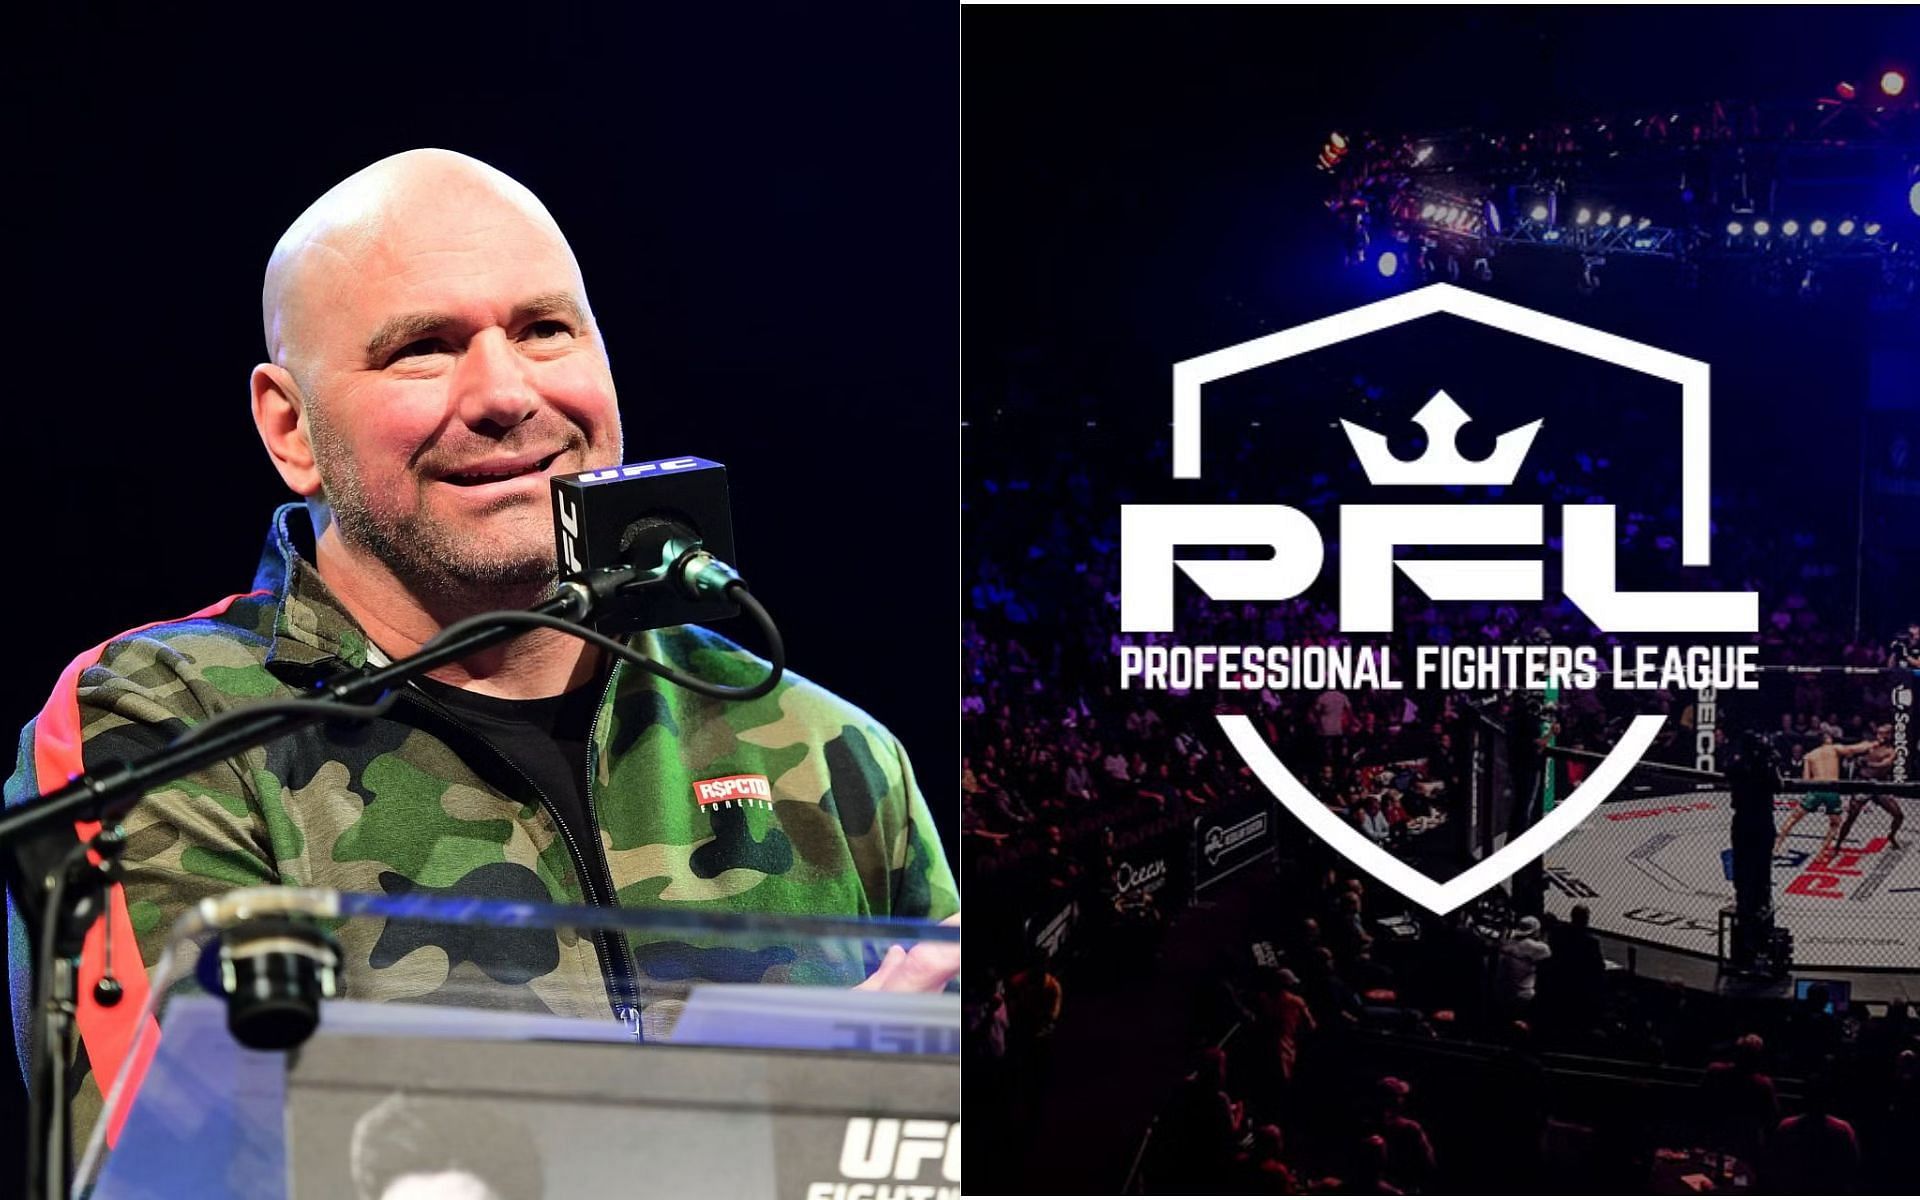 UFC CEO Dana White (left) and [Image Courtesy: PFL official website]